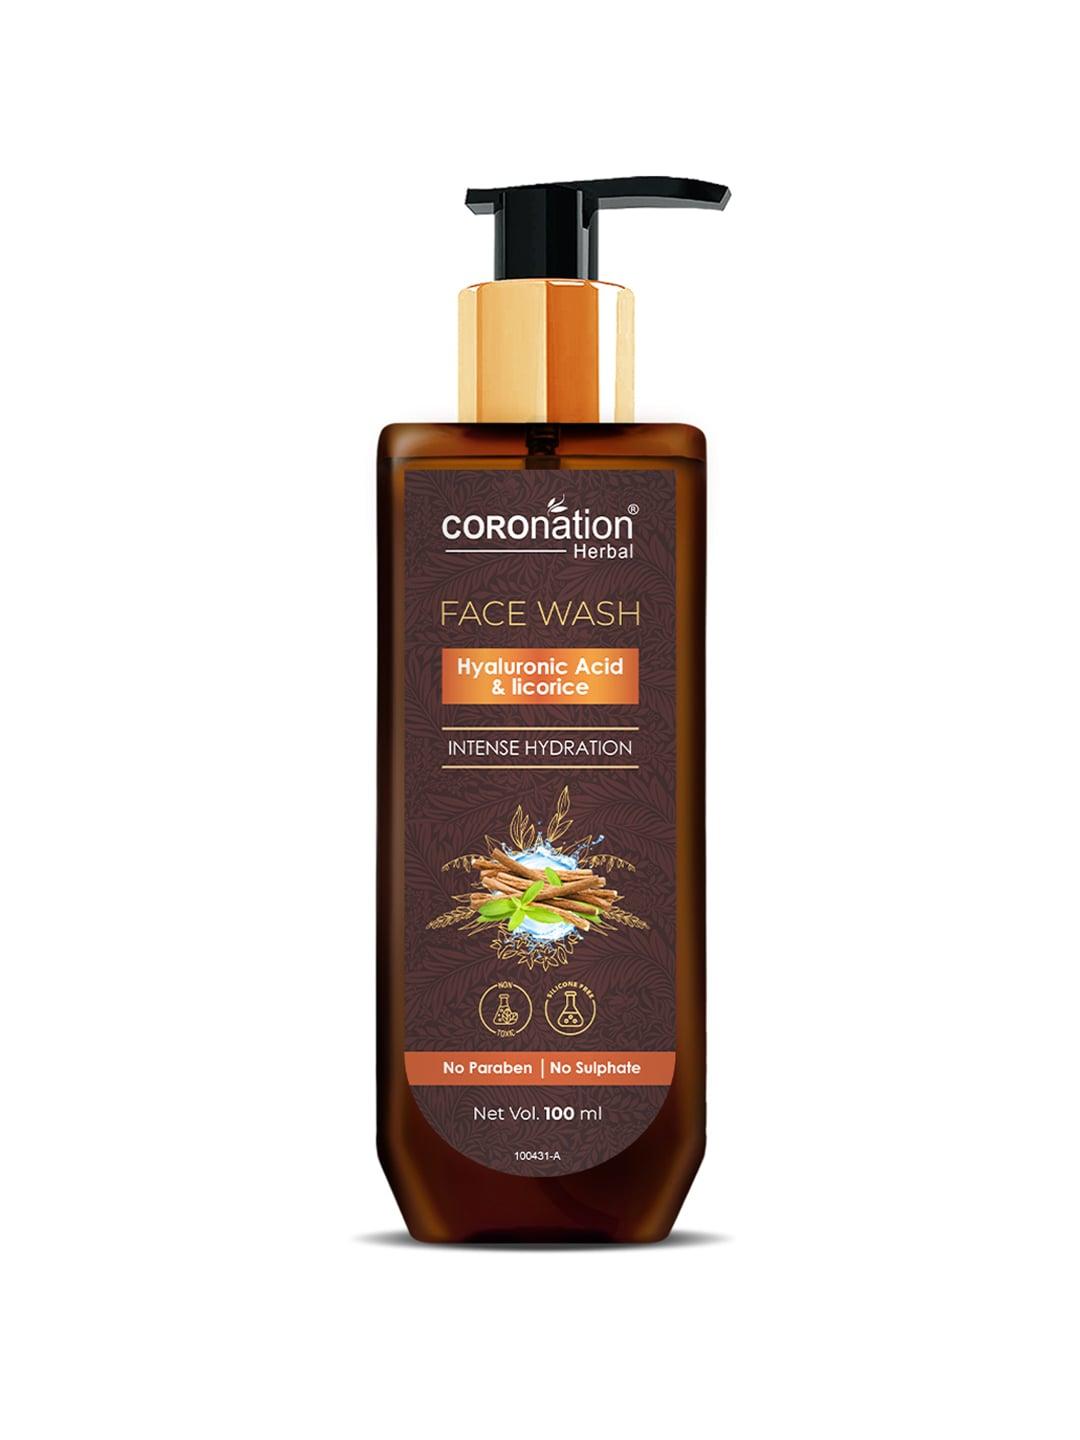 COROnation Herbal Intense Hydration Face Wash with Hyaluronic Acid & Licorice - 100 ml